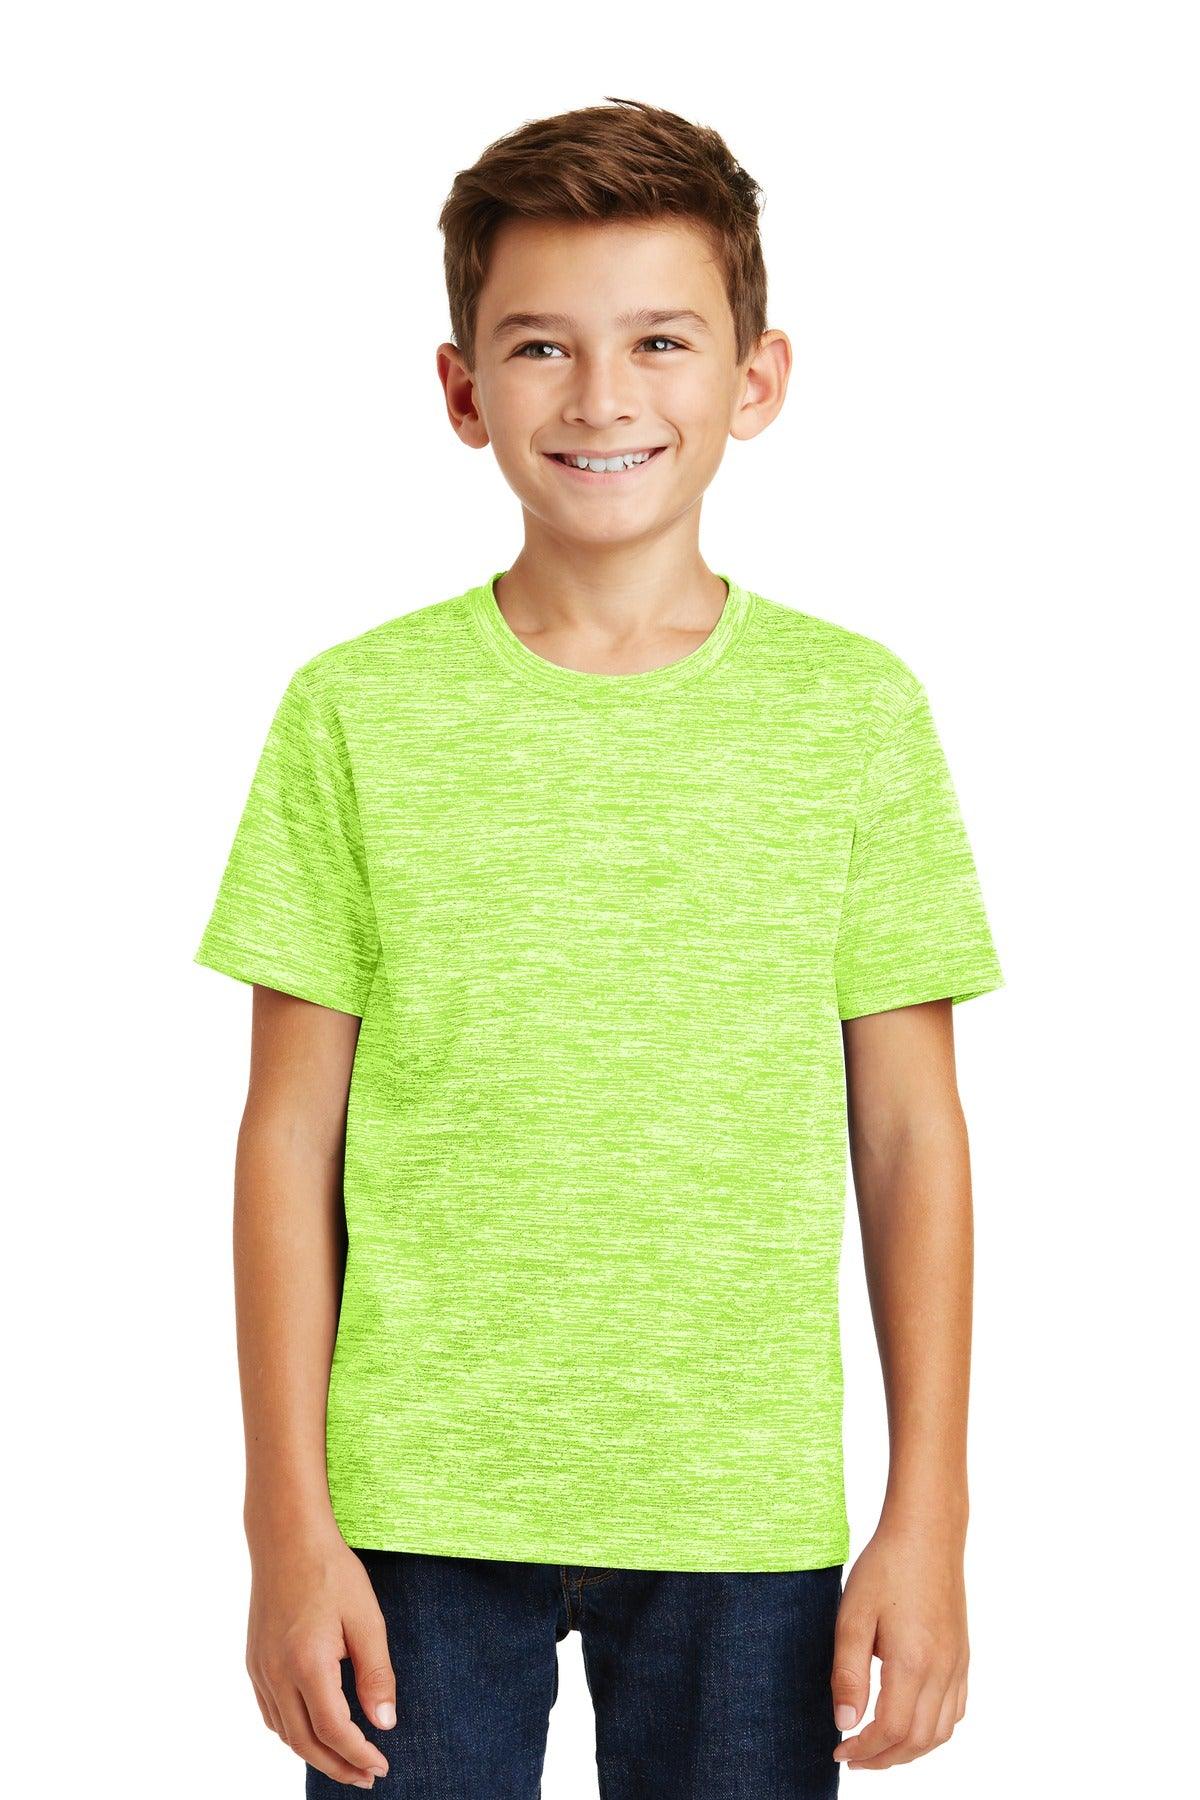 Sport-Tek Youth PosiCharge Electric Heather Tee. YST390 - Dresses Max